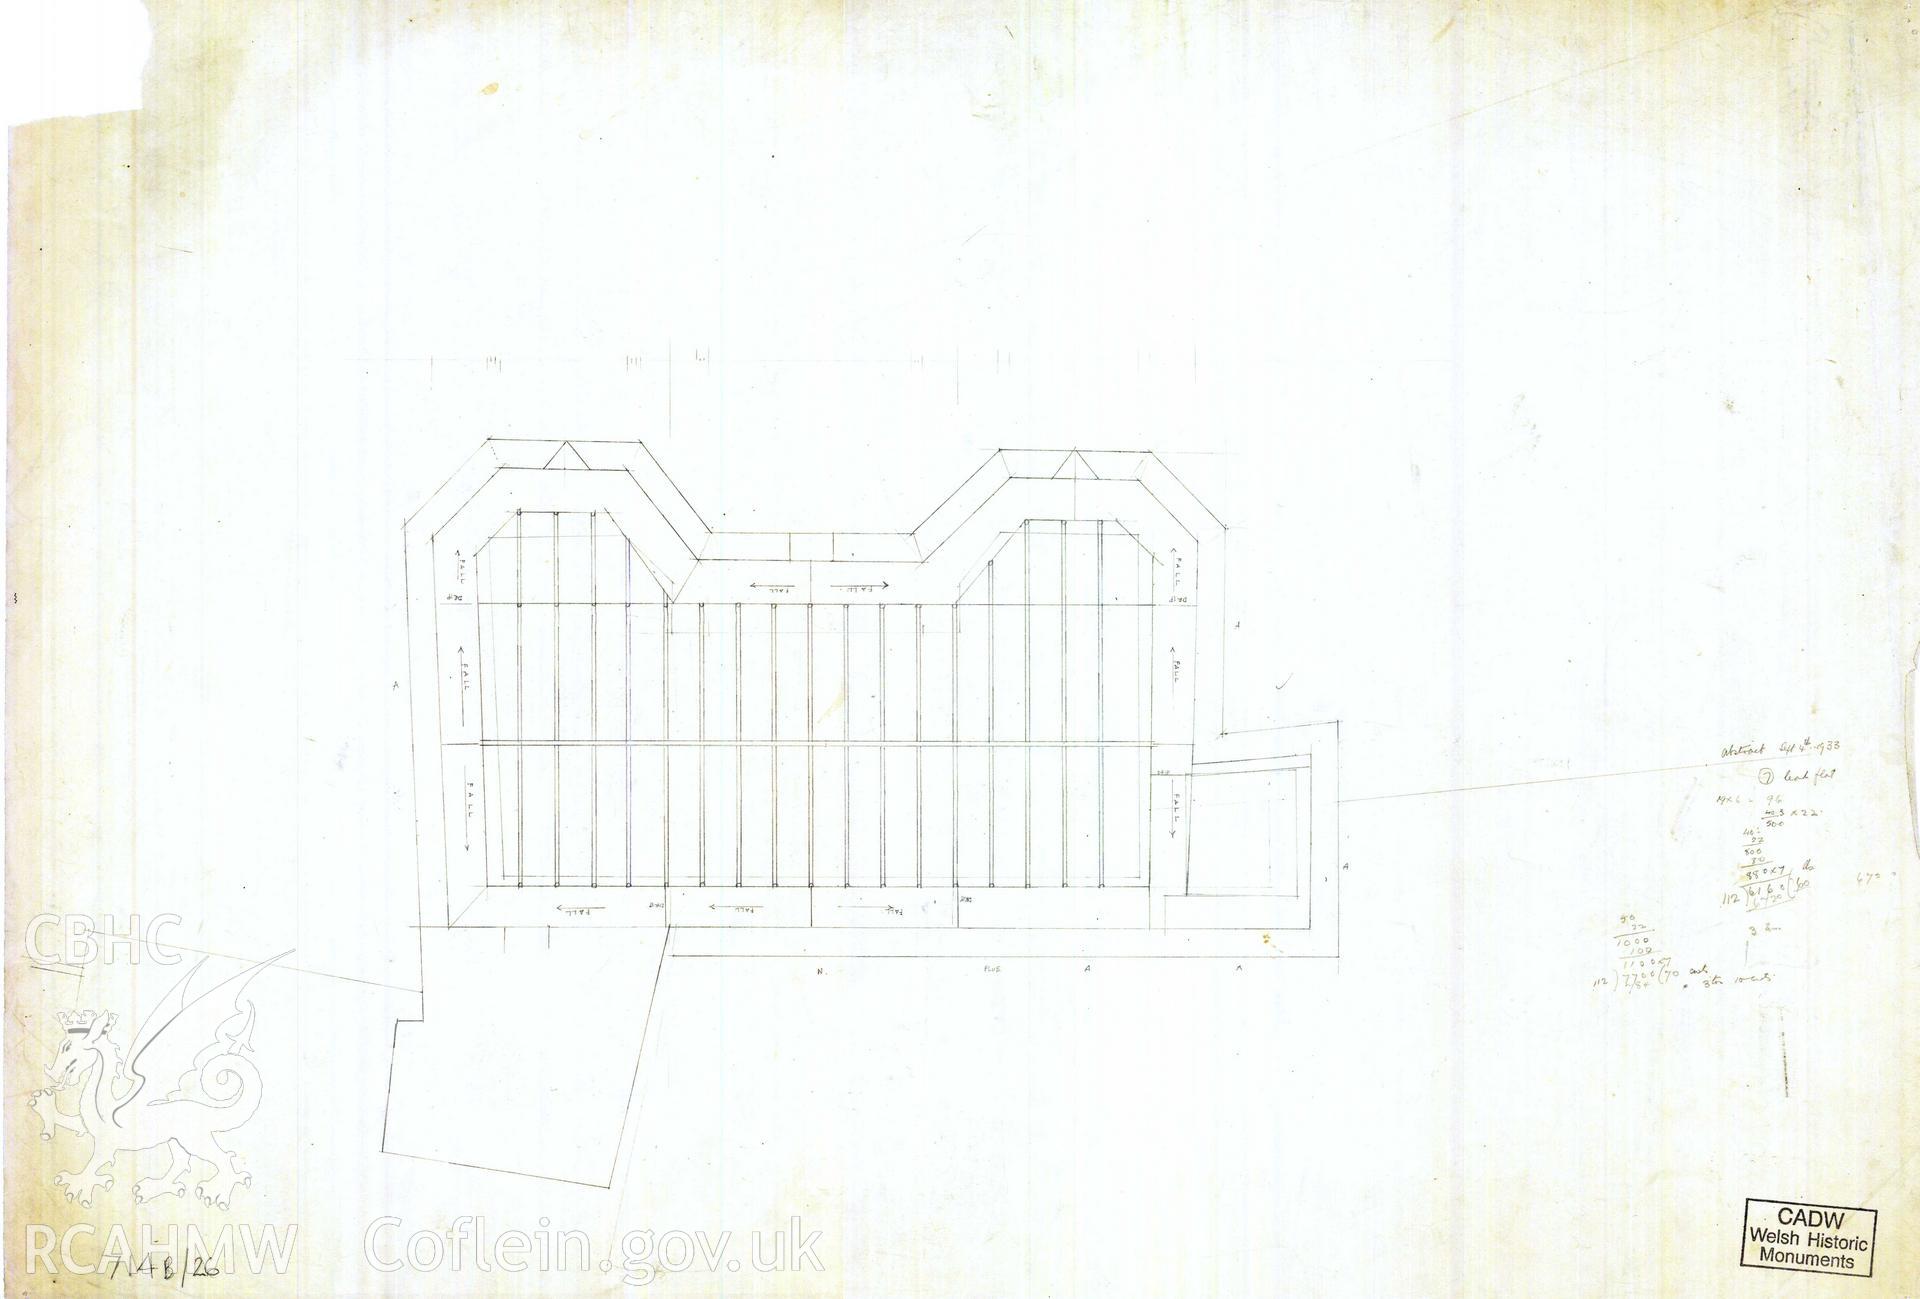 Cadw guardianship monument drawing of Caerphilly Castle. Outer E gate, roof leadwork. Cadw ref. no: 714B/26. Scale 1:48.